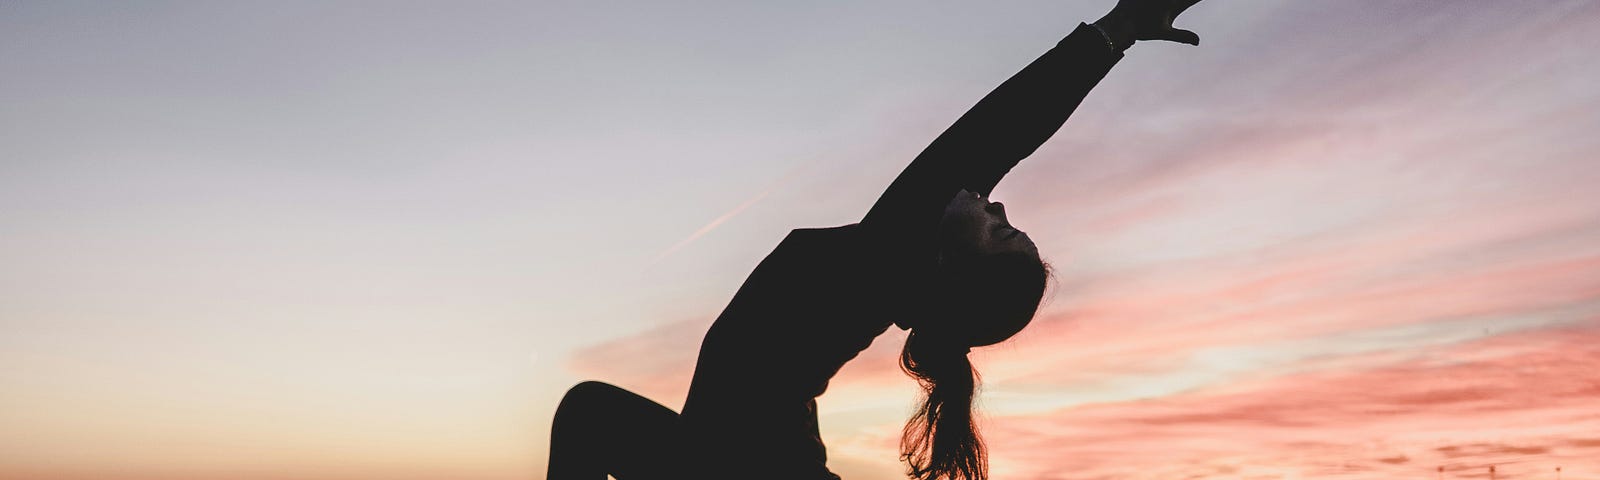 A silhouette of a woman in a deep stretching yoga moves during sunrise at the beach.